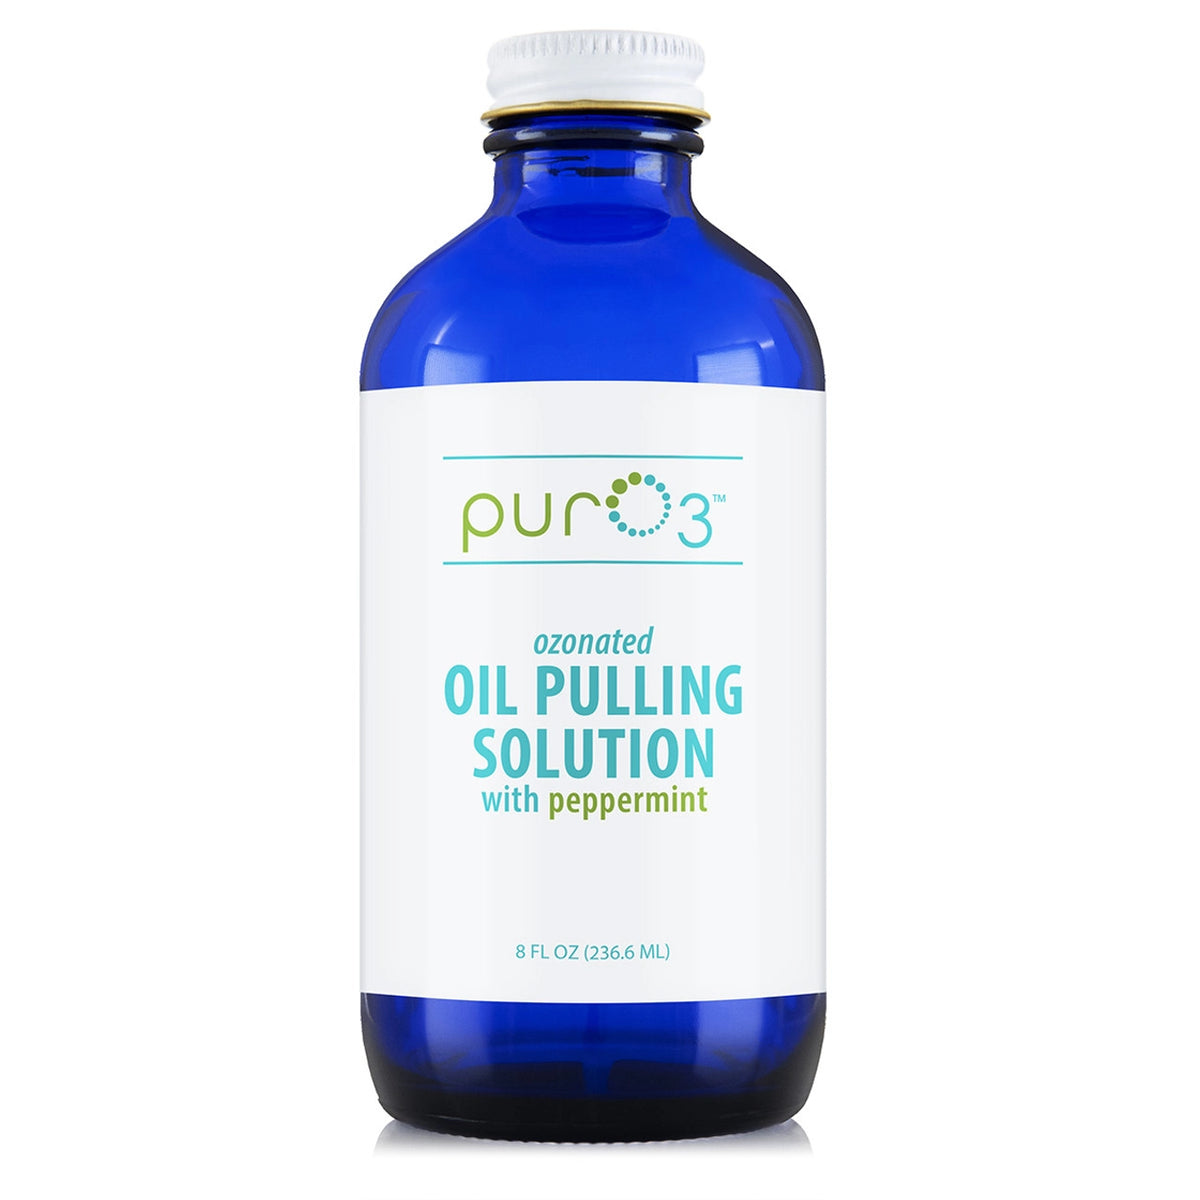 PurO3 Oil Pulling Solution with Peppermint (8fl oz / 237ml)